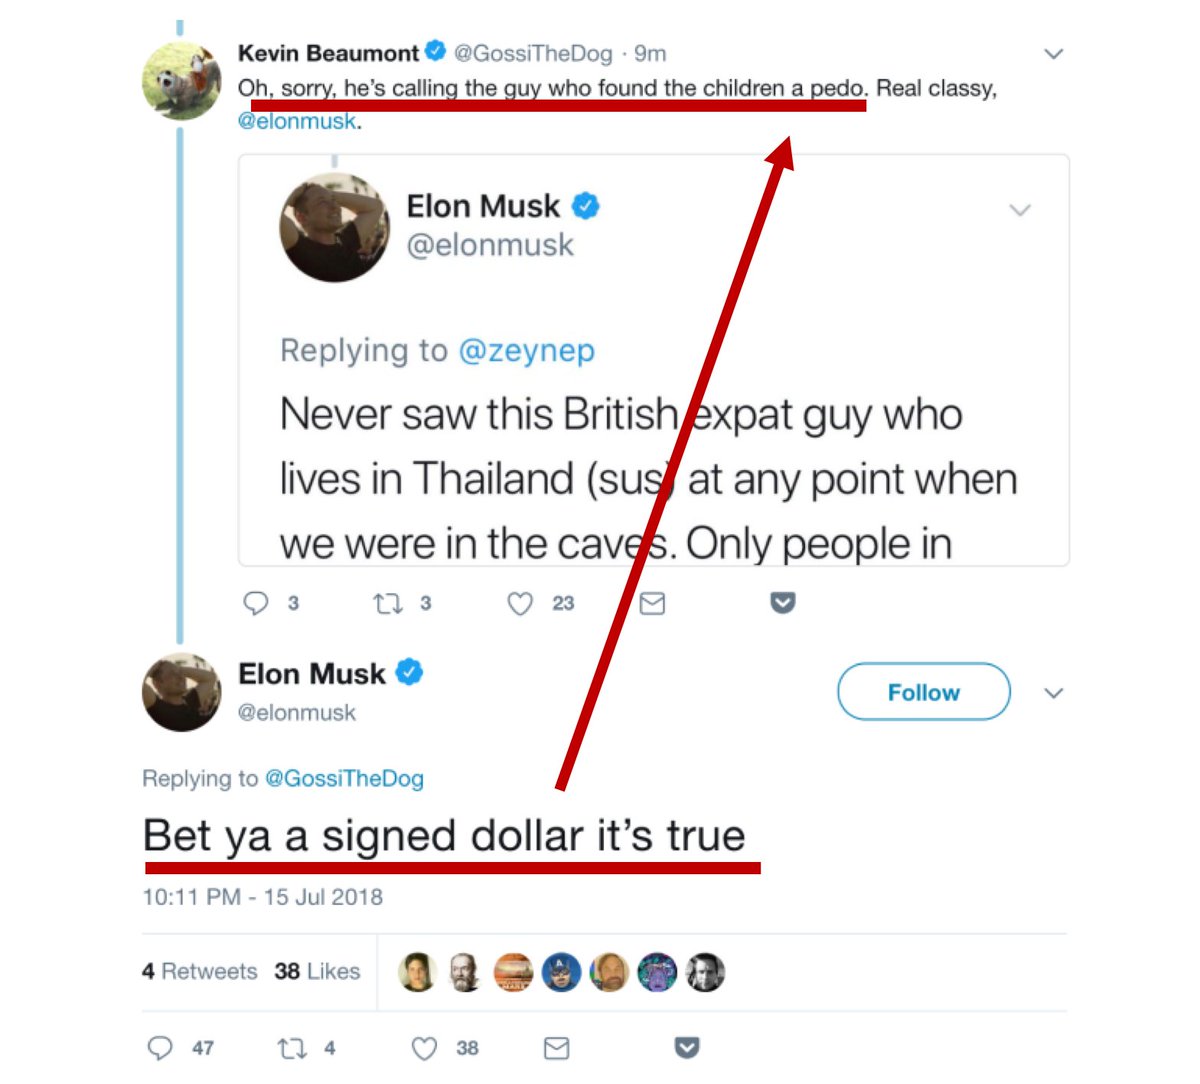 5/ To me, the most damning evidence against Elon's assertion that he didn't mean 'pedophile' is his 'signed dollar tweet'. The tweet he responded to specifically says "he's calling the guy... a pedo".  $TSLAQ